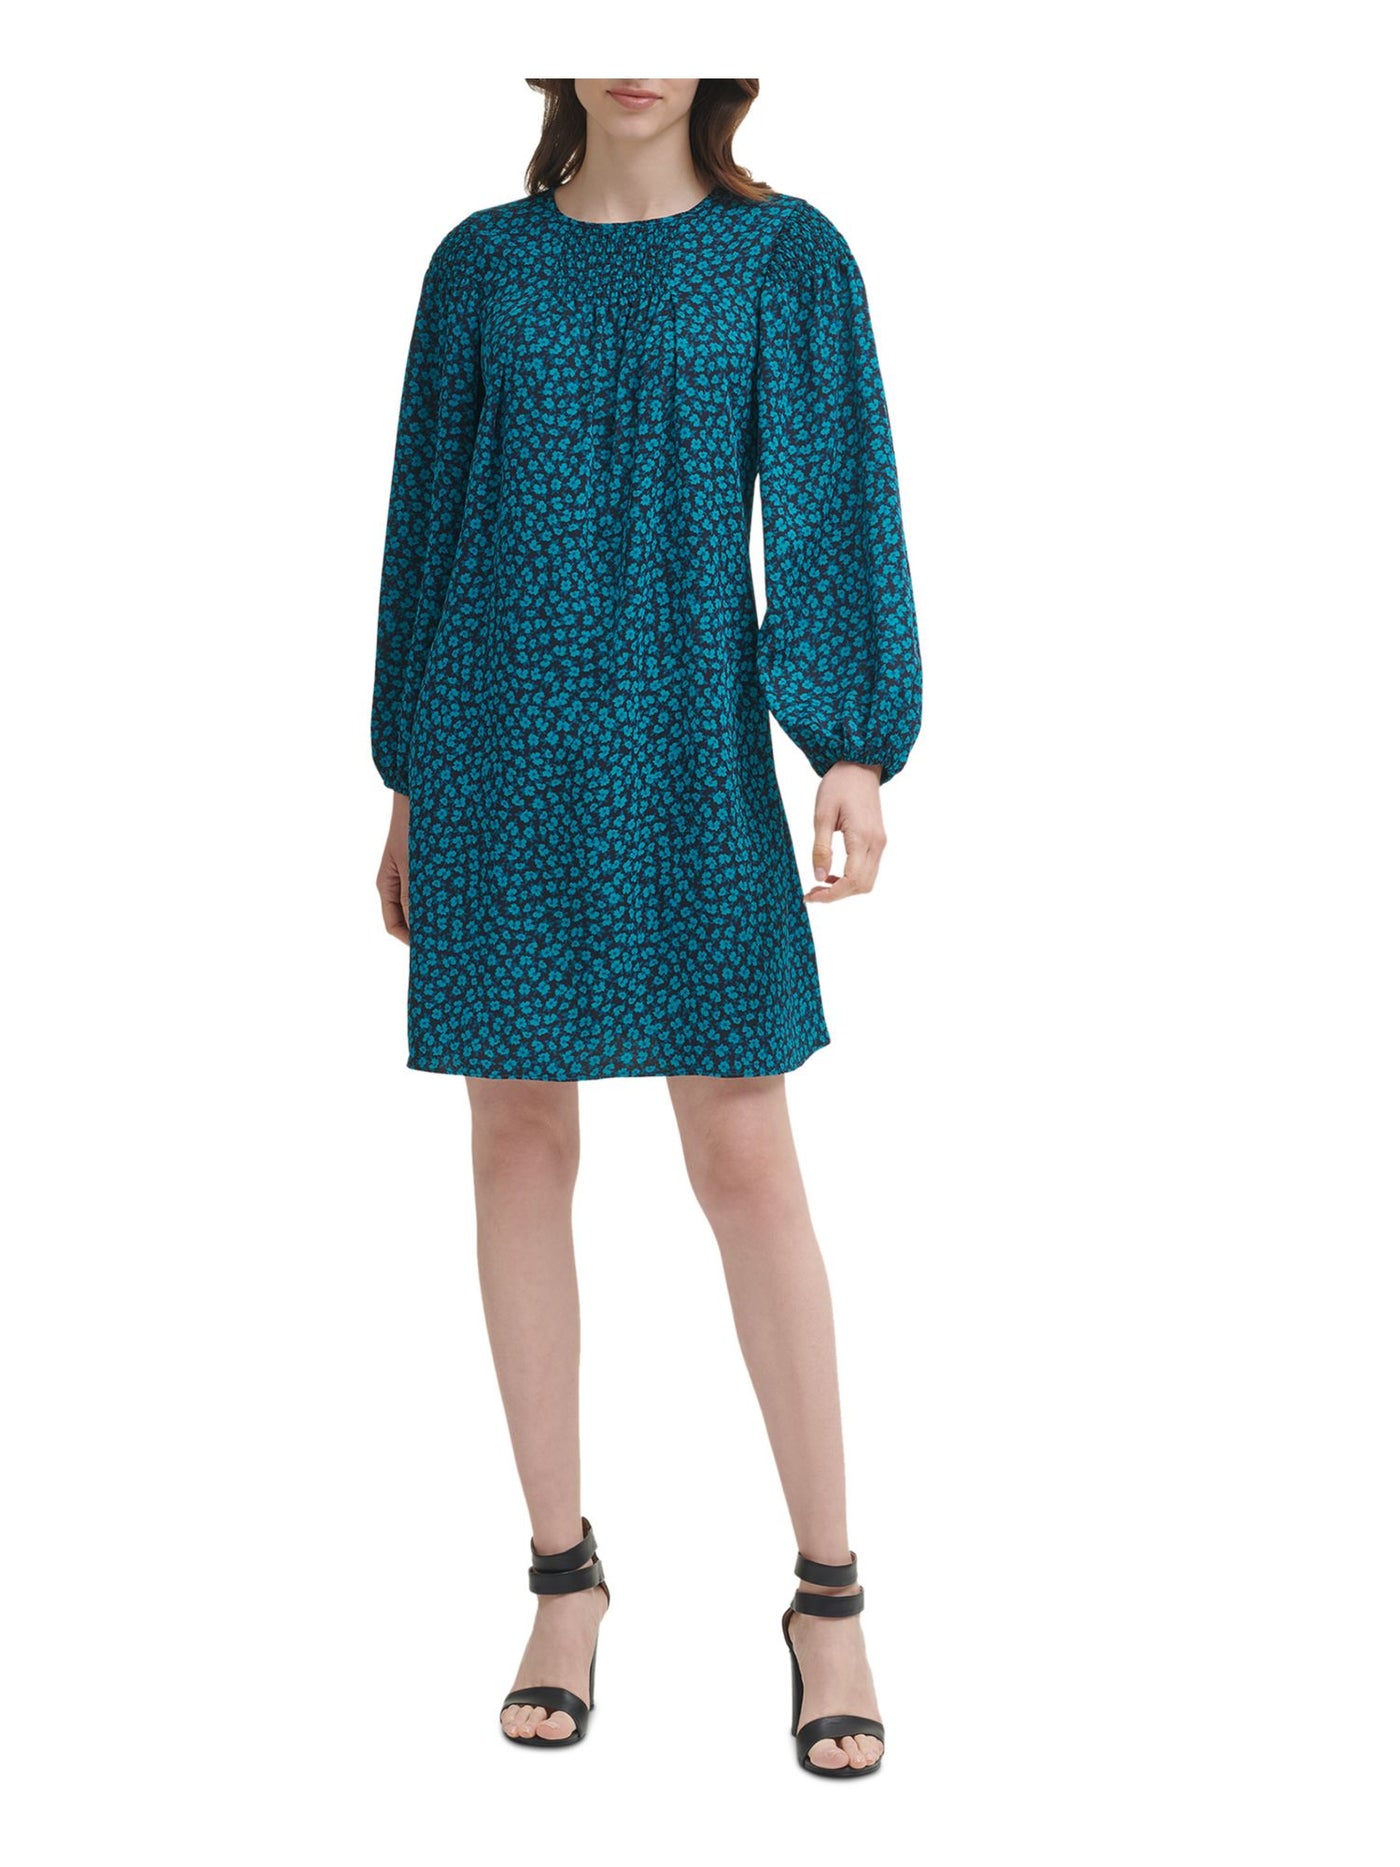 DKNY Womens Blue Smocked Floral Long Sleeve Round Neck Short Evening Shift Dress 2